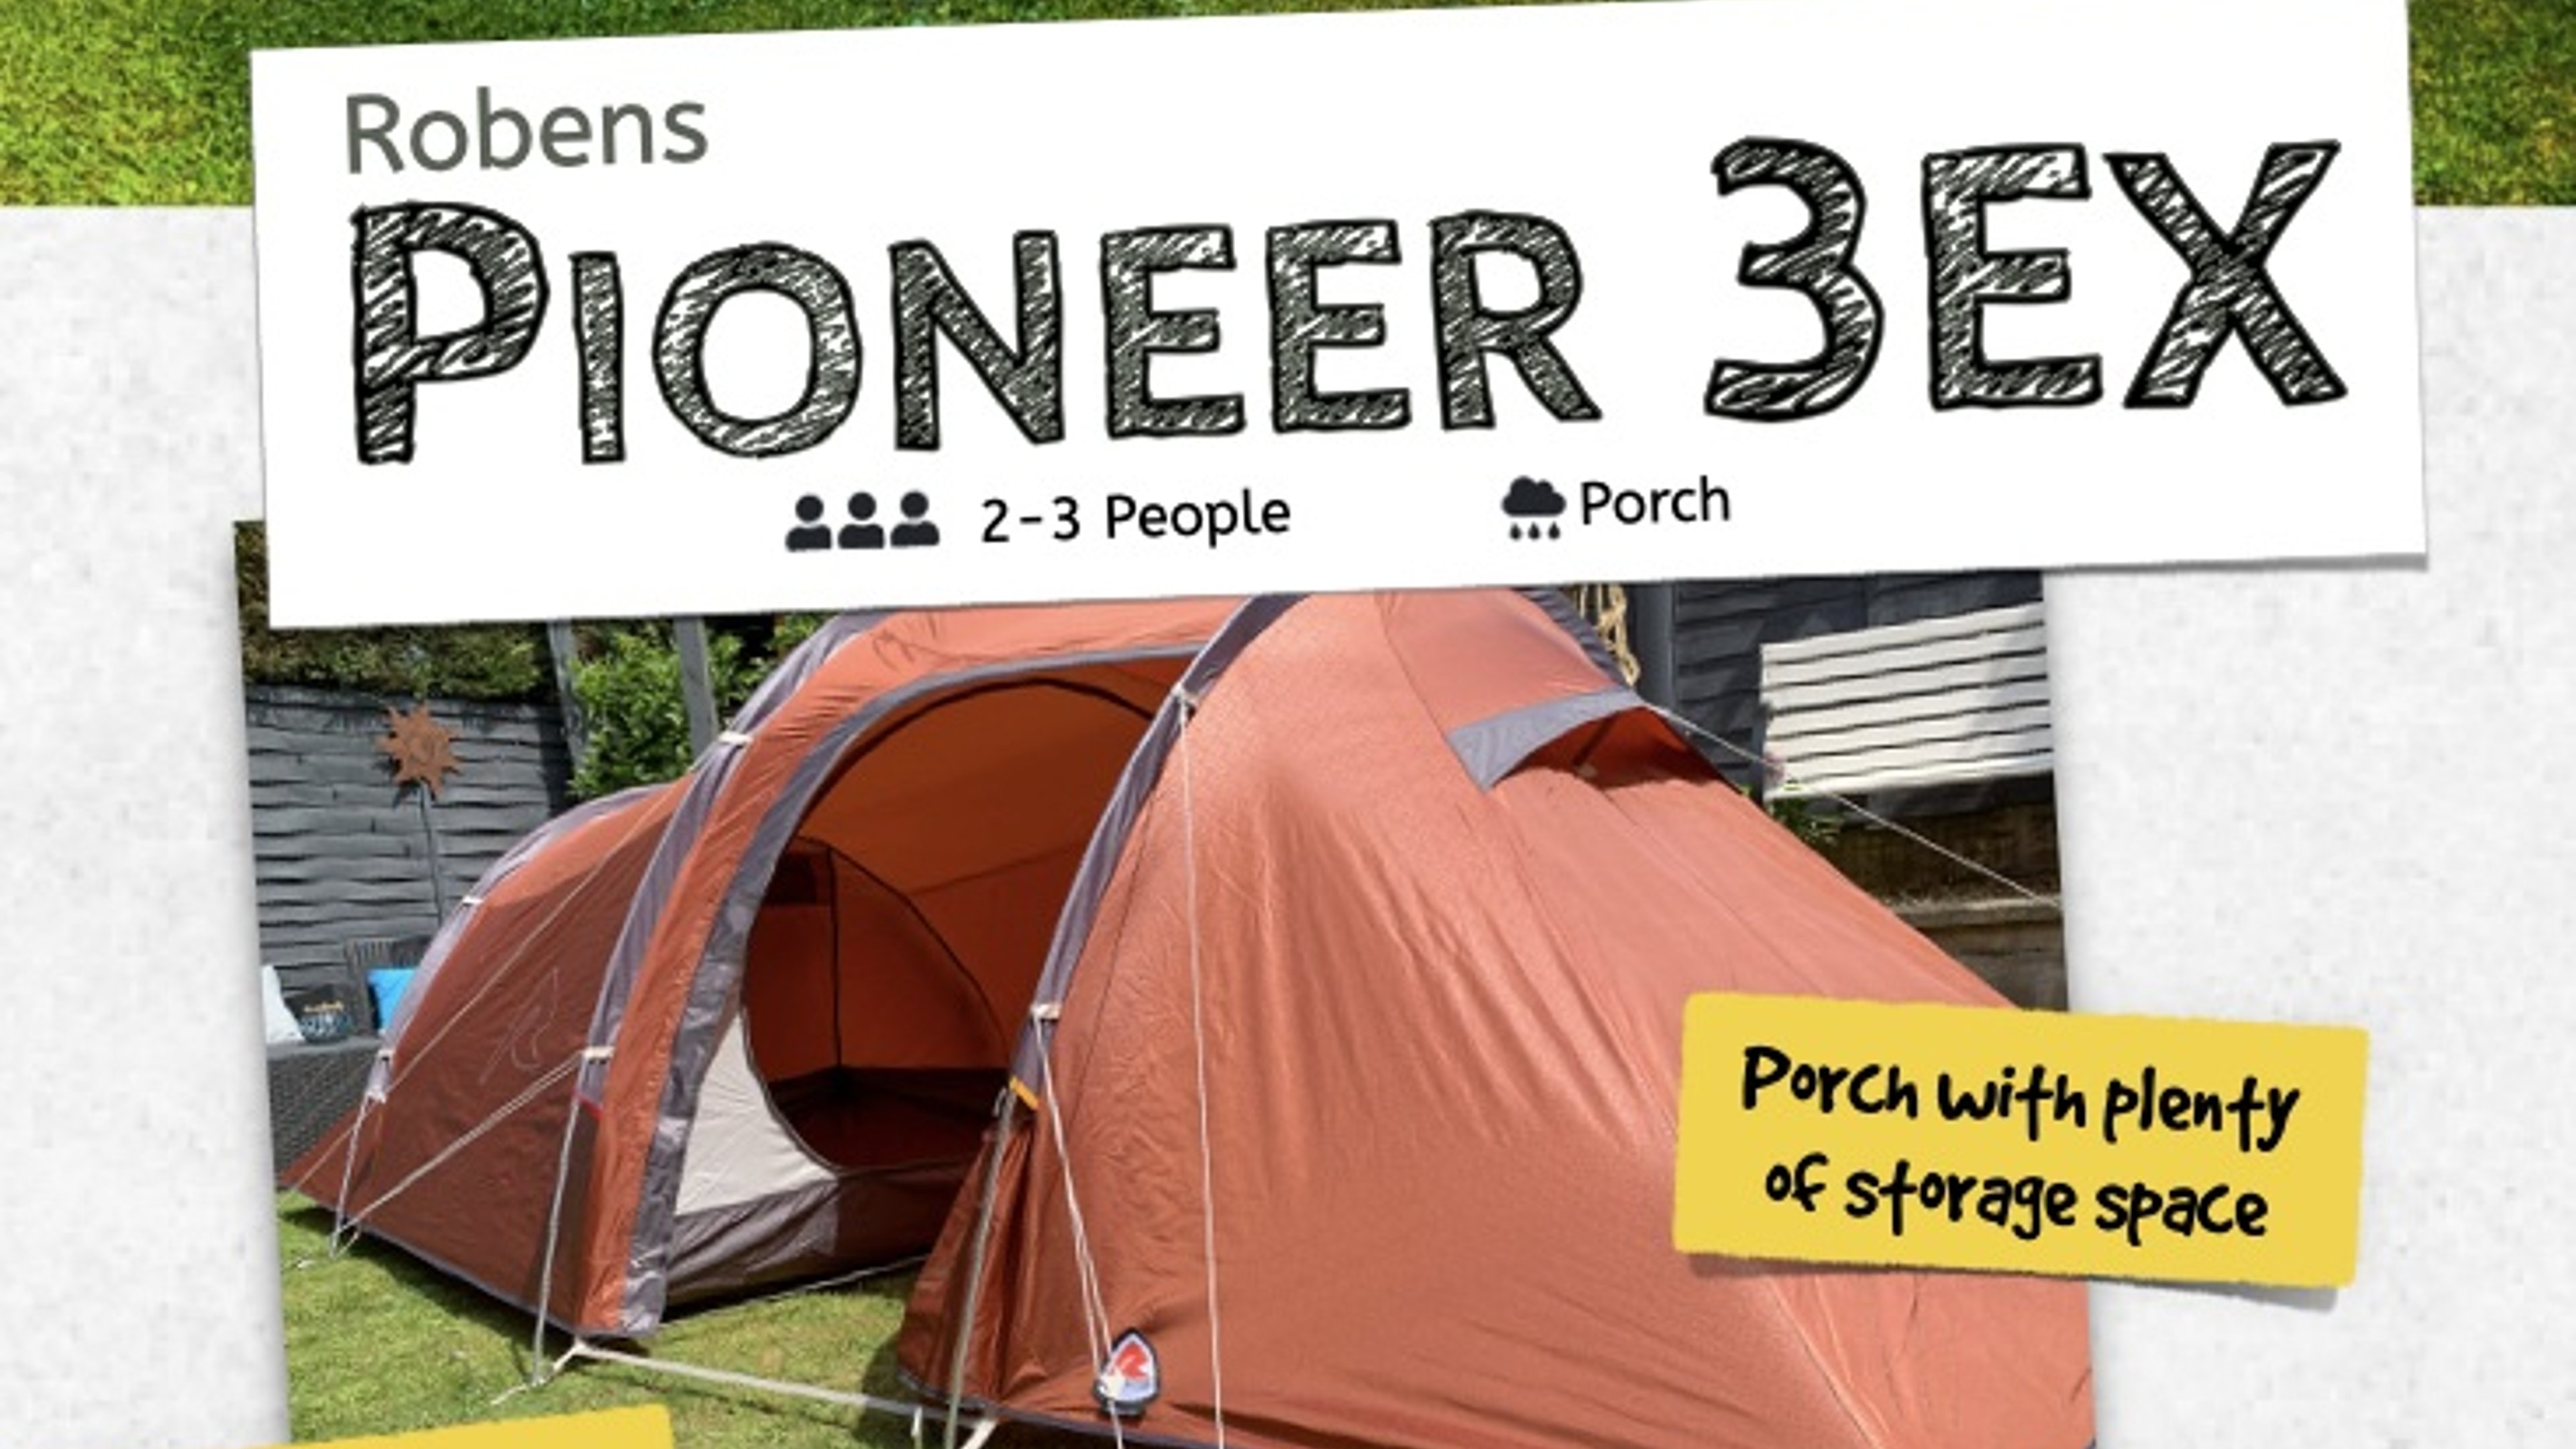 Info about the Robens Pioneer 3EX Tent